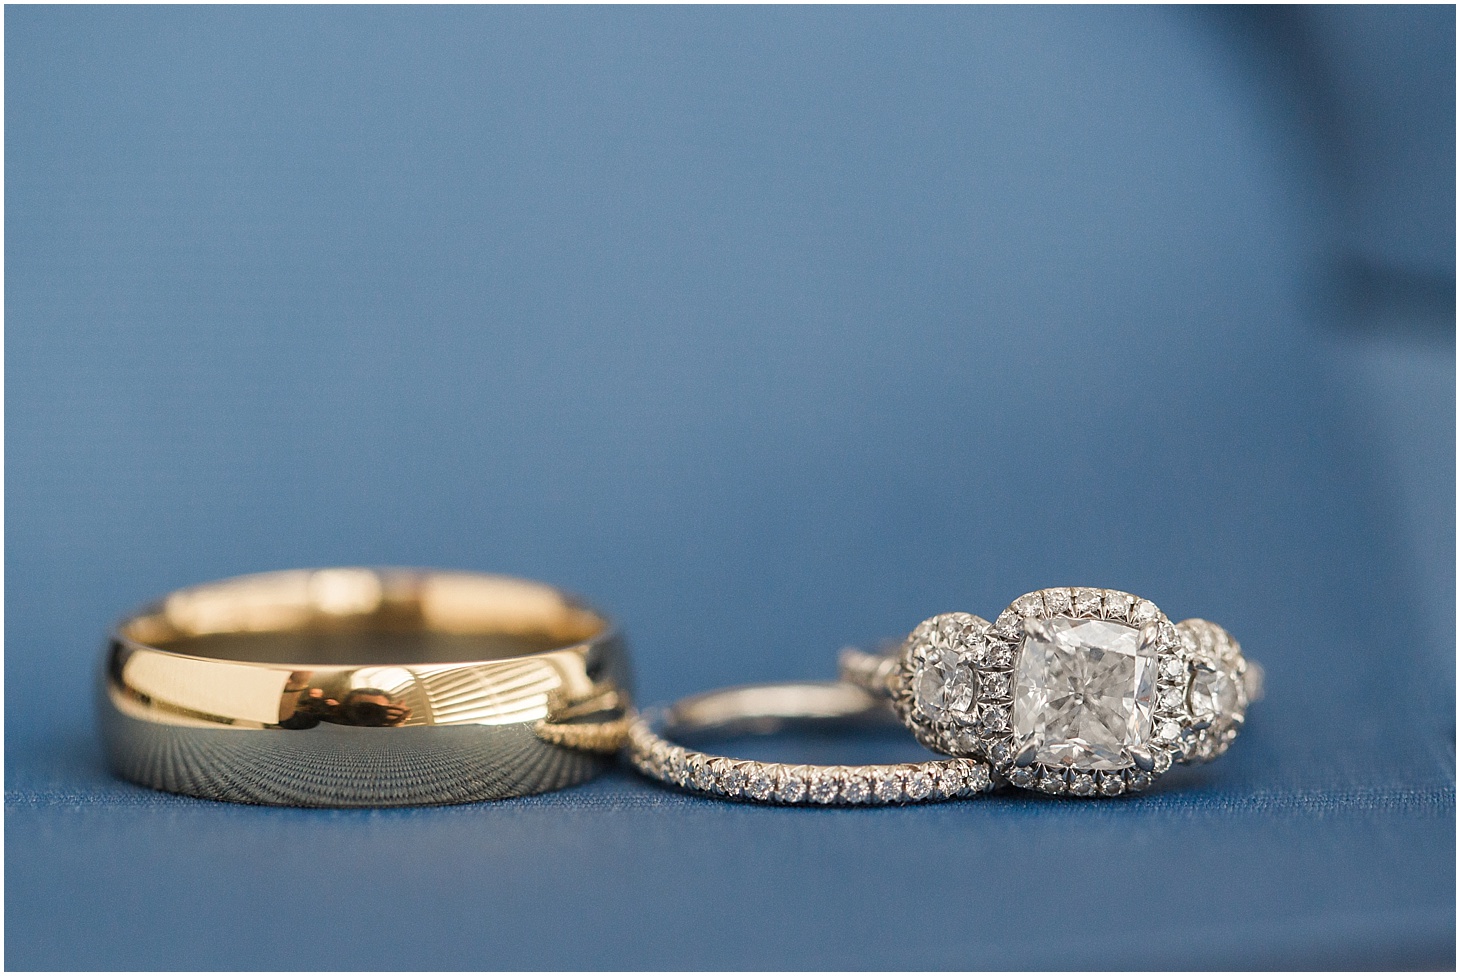 Engagement Ring and Wedding Band Details| Wedding Ceremony at Old Presbyterian Meeting House | Southern Black Tie wedding at St. Regis DC in Dusty Blue and Ivory | Sarah Bradshaw Photography